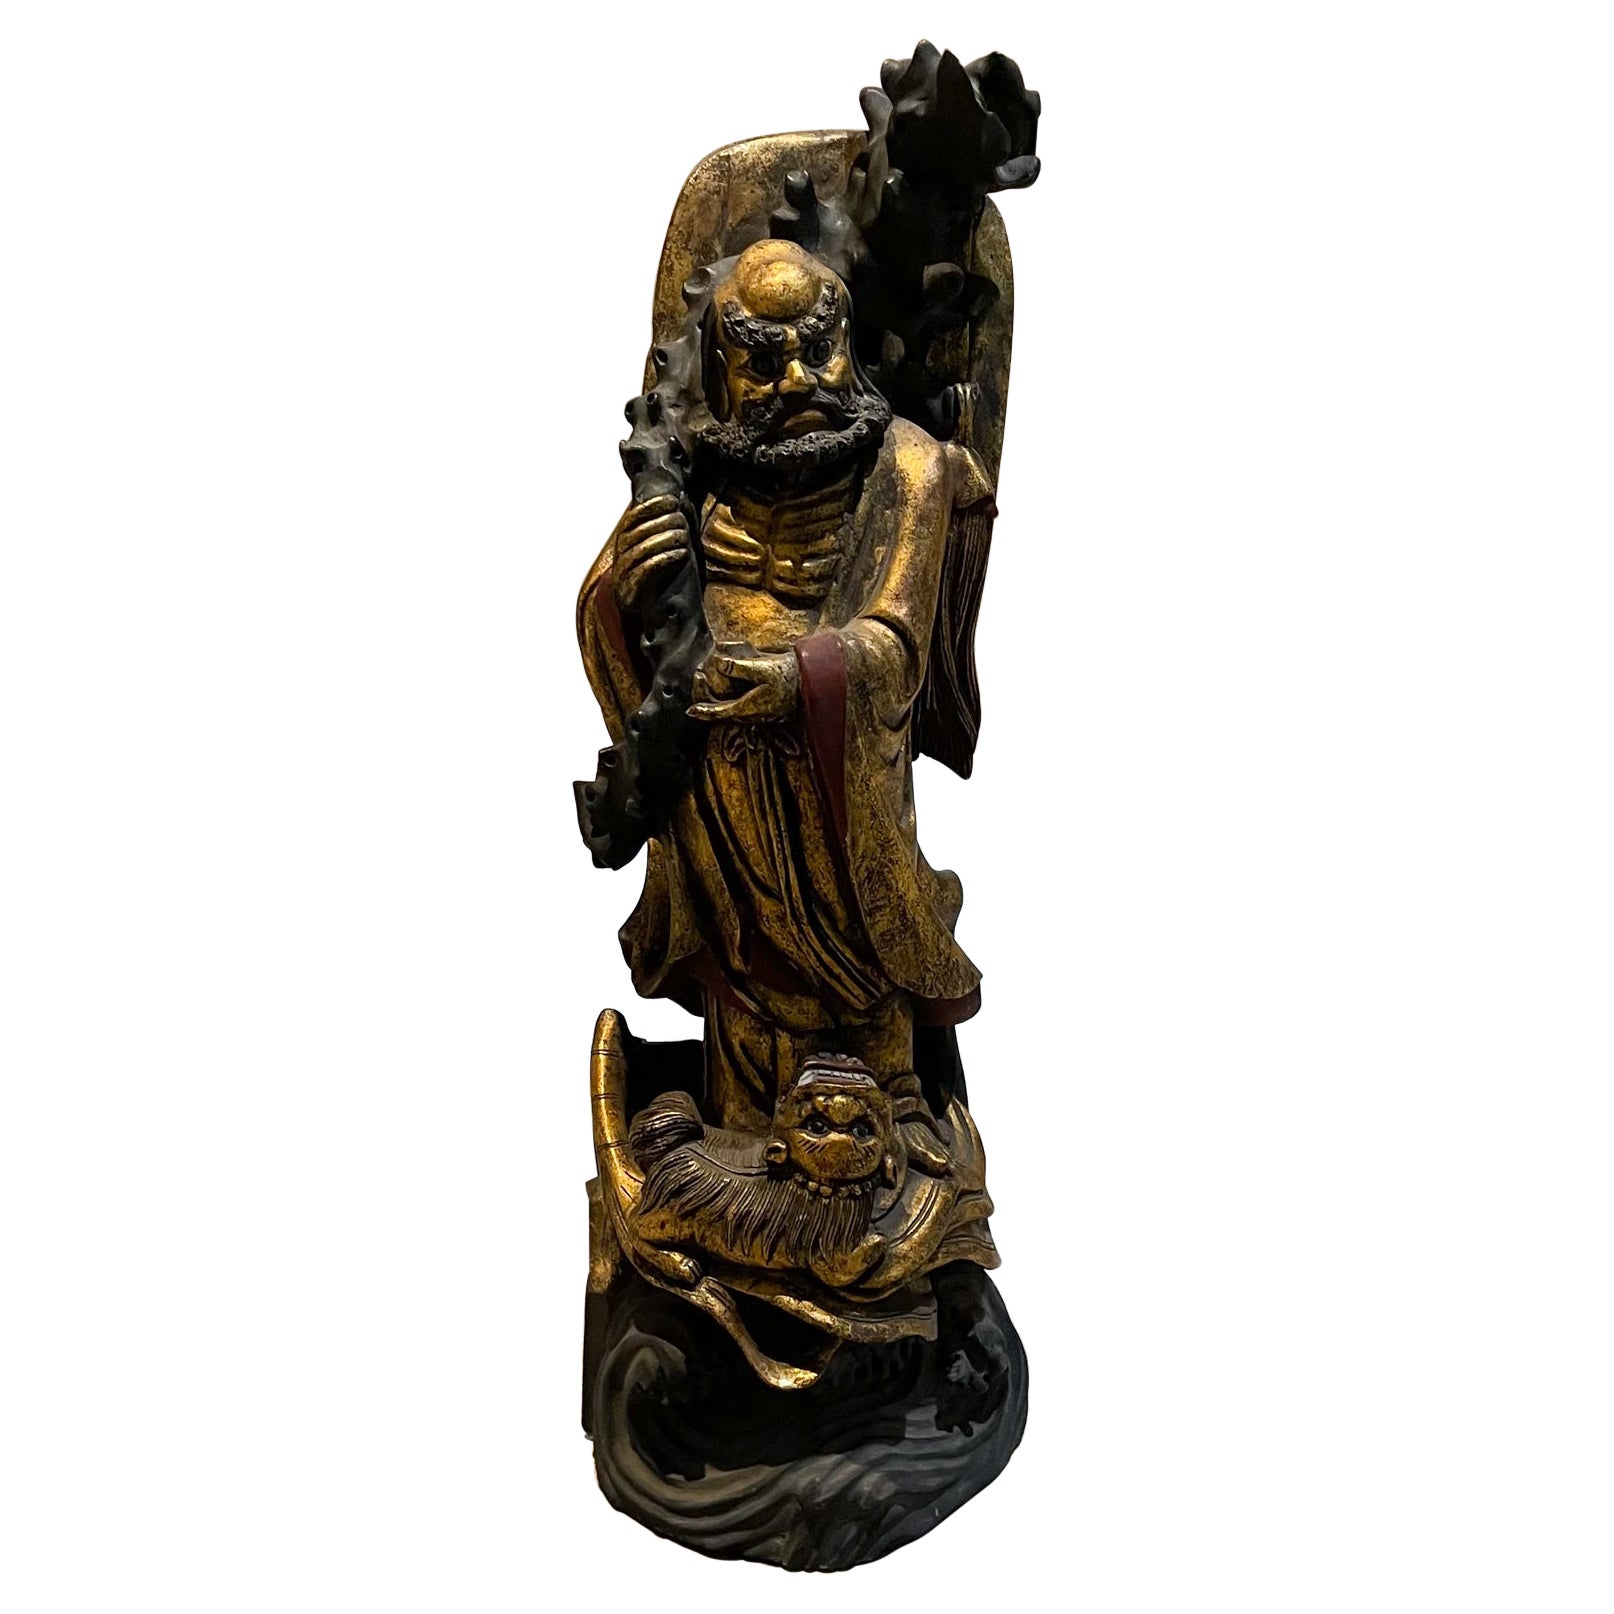 Intricate Chinese Immortal Deity Foo Dog Sculpture Carved Wood Gold Gilt & Black For Sale